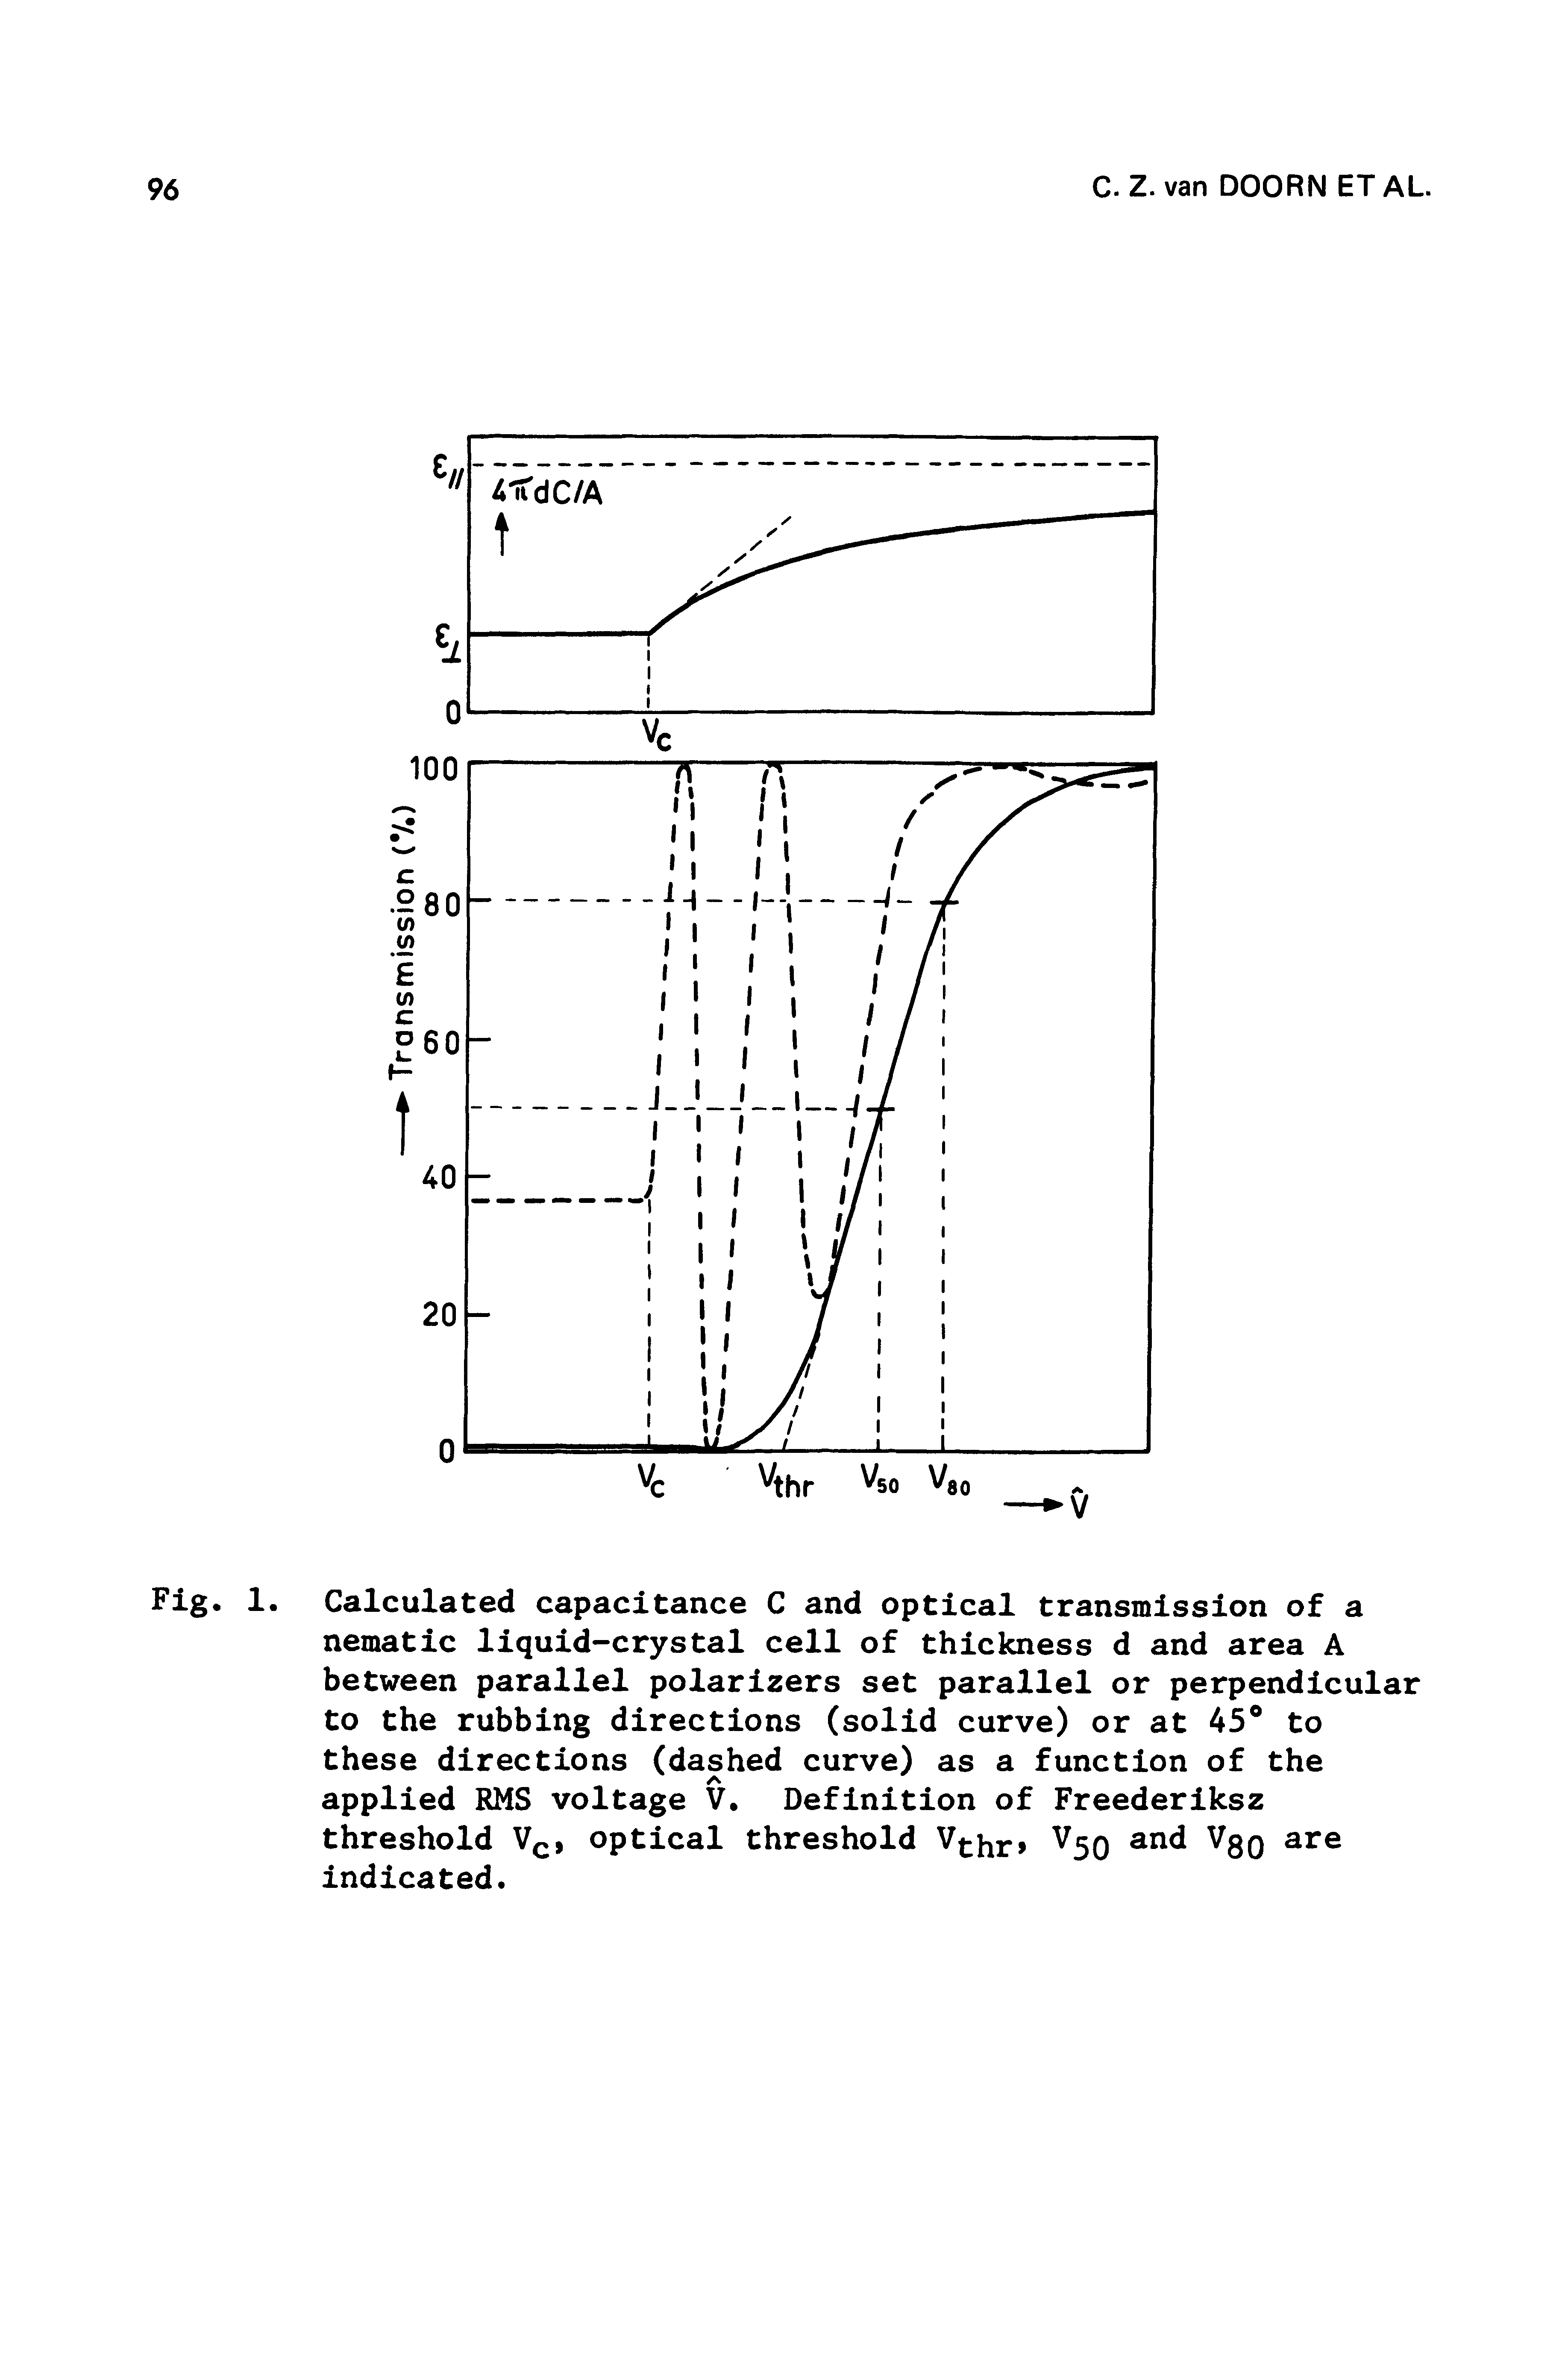 Fig. 1. Calculated capacitance C and optical transmission of a nematic liquid-crystal cell of thickness d and area A between parallel polarizers set parallel or perpendicular to the rubbing directions (solid curve) or at 45 to these directions (dashed curve) as a function of the applied RMS voltage V. Definition of Freederlksz threshold optical threshold Vthr> 50 80...